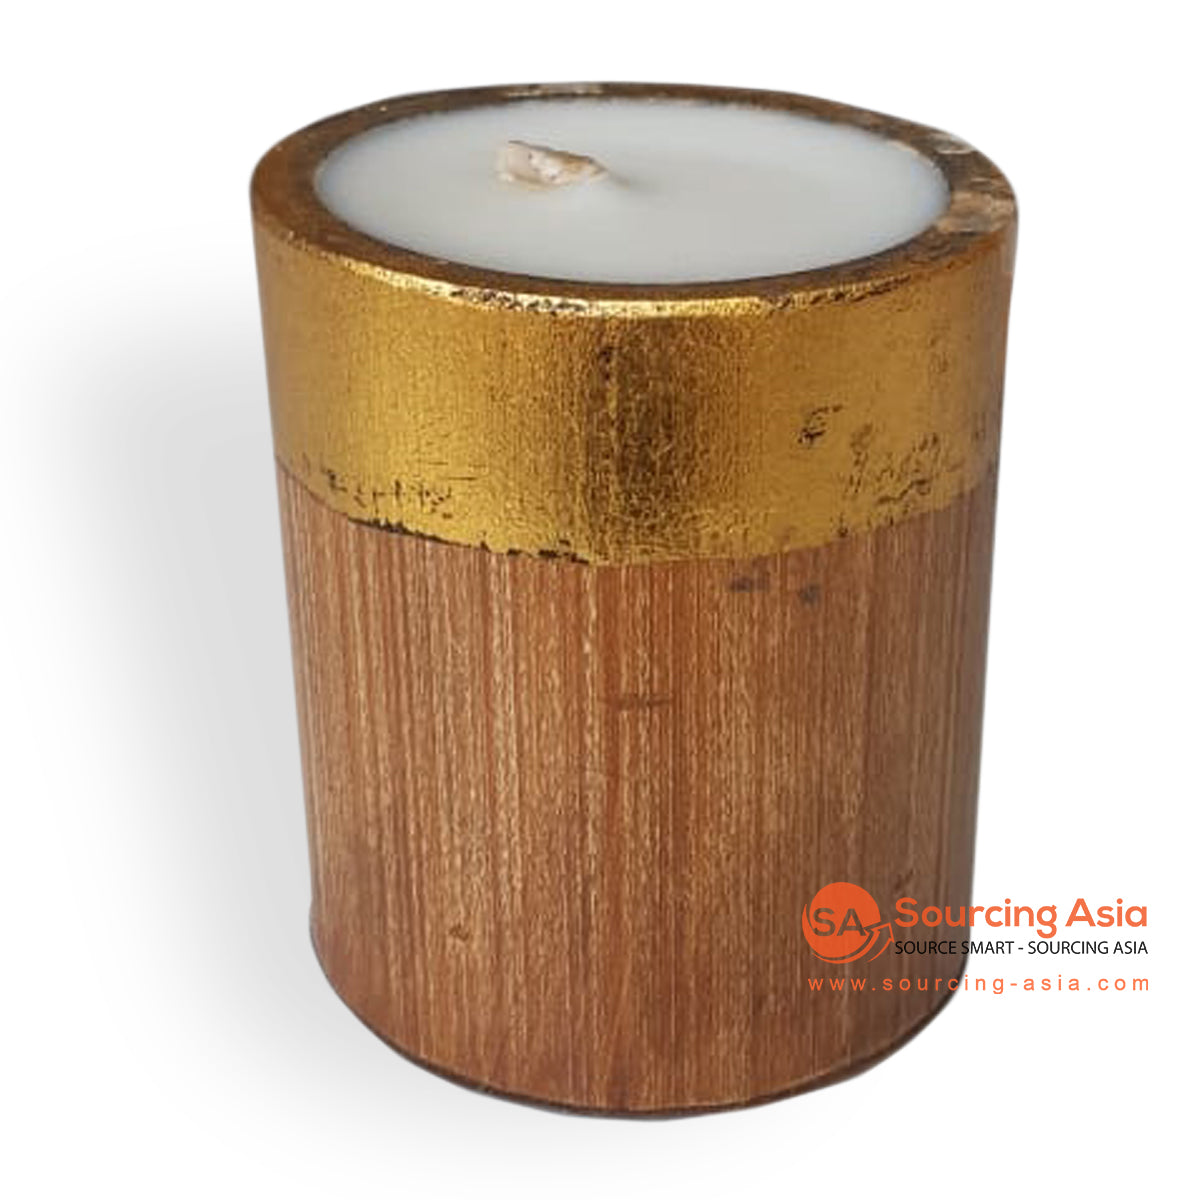 BSC017-3 NATURAL BAMBOO WOOD CANDLE WITH GOLDEN EDGE